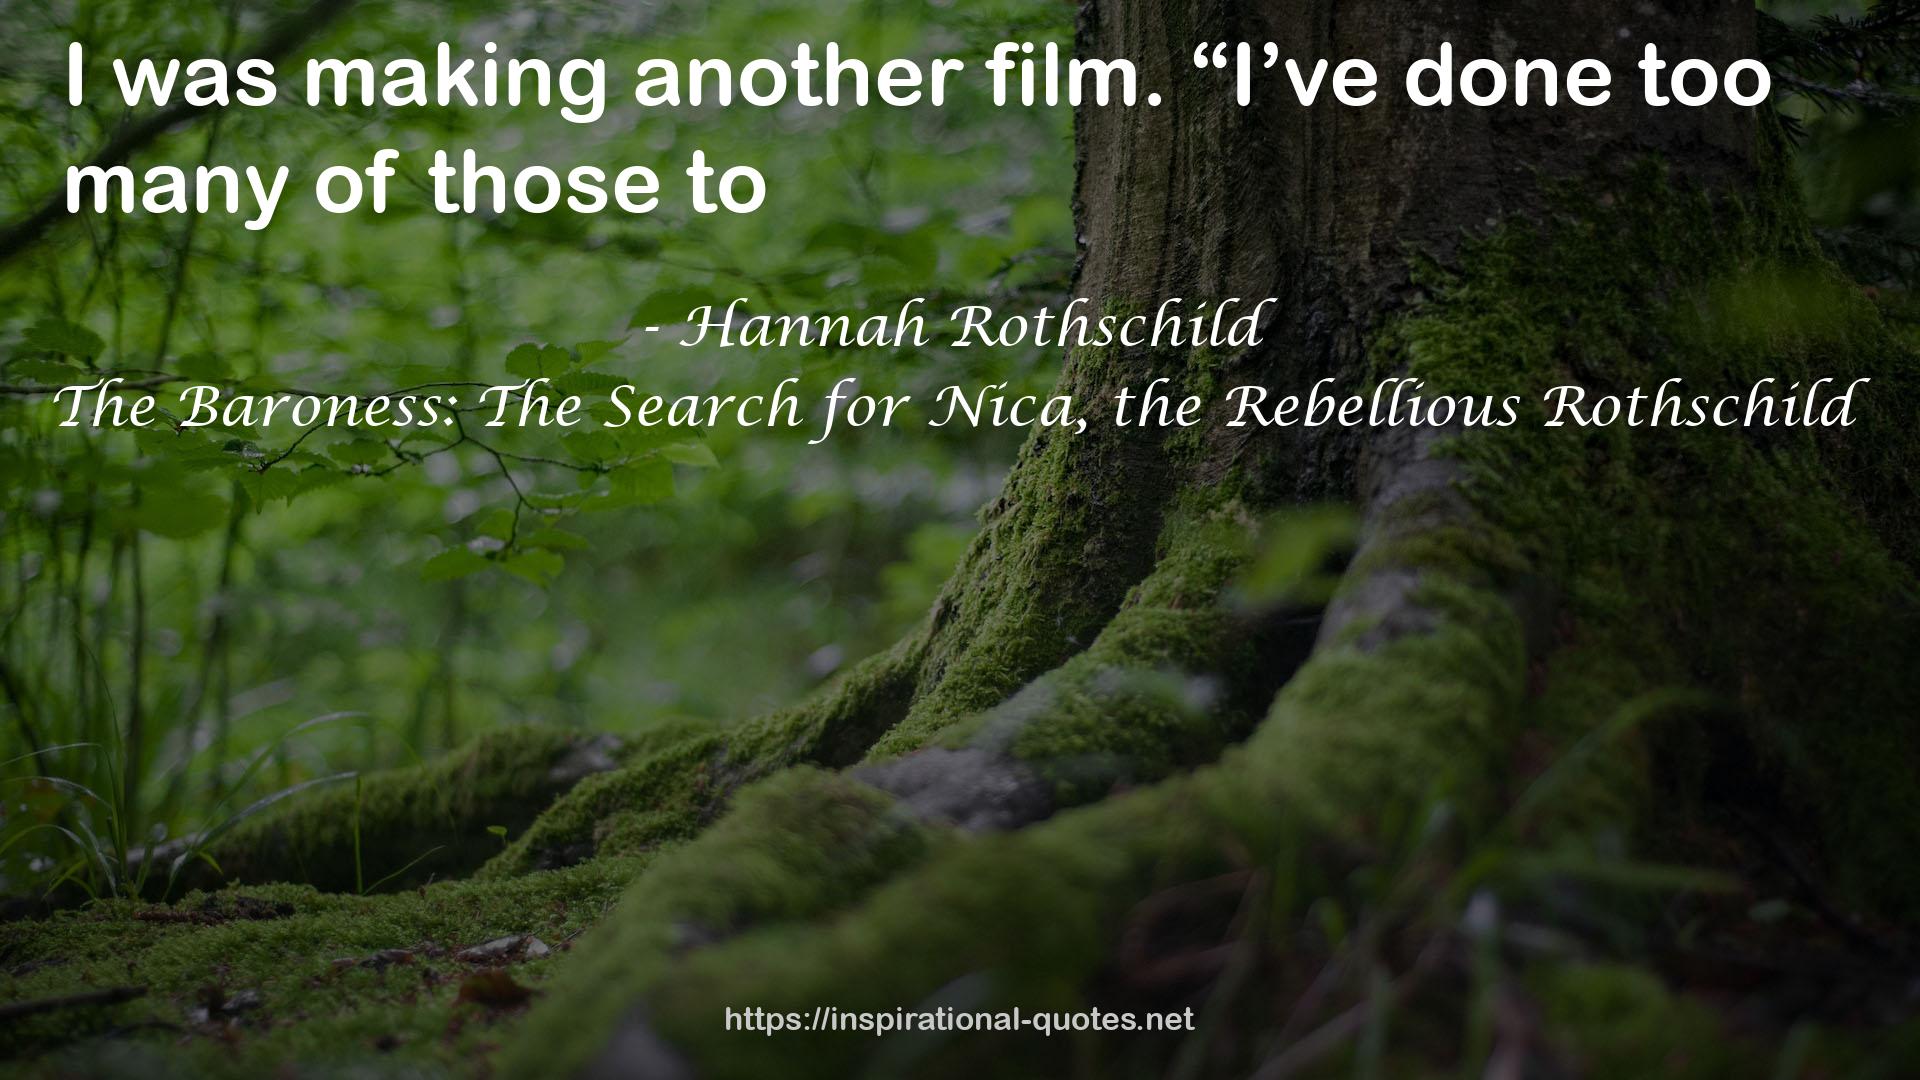 The Baroness: The Search for Nica, the Rebellious Rothschild QUOTES